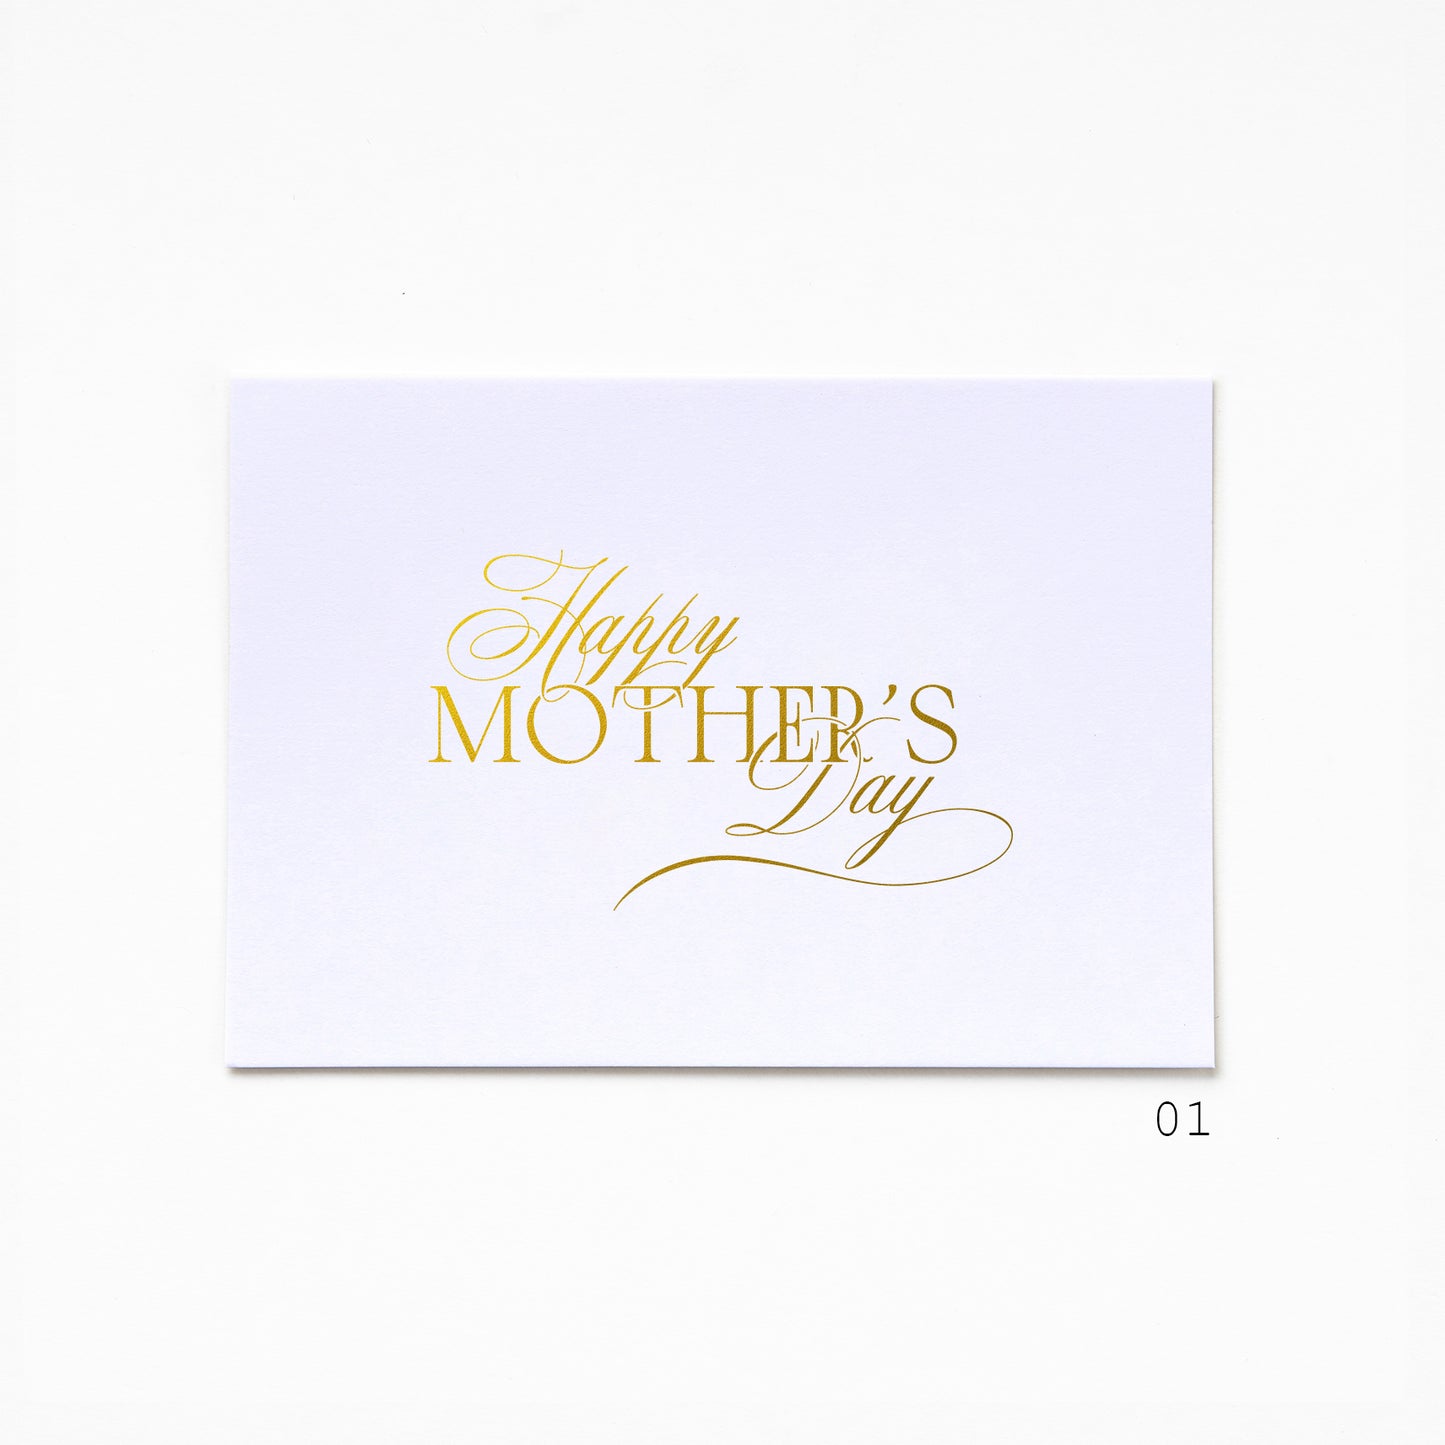 A6 Greeting Card - Happy Mother's Day 01